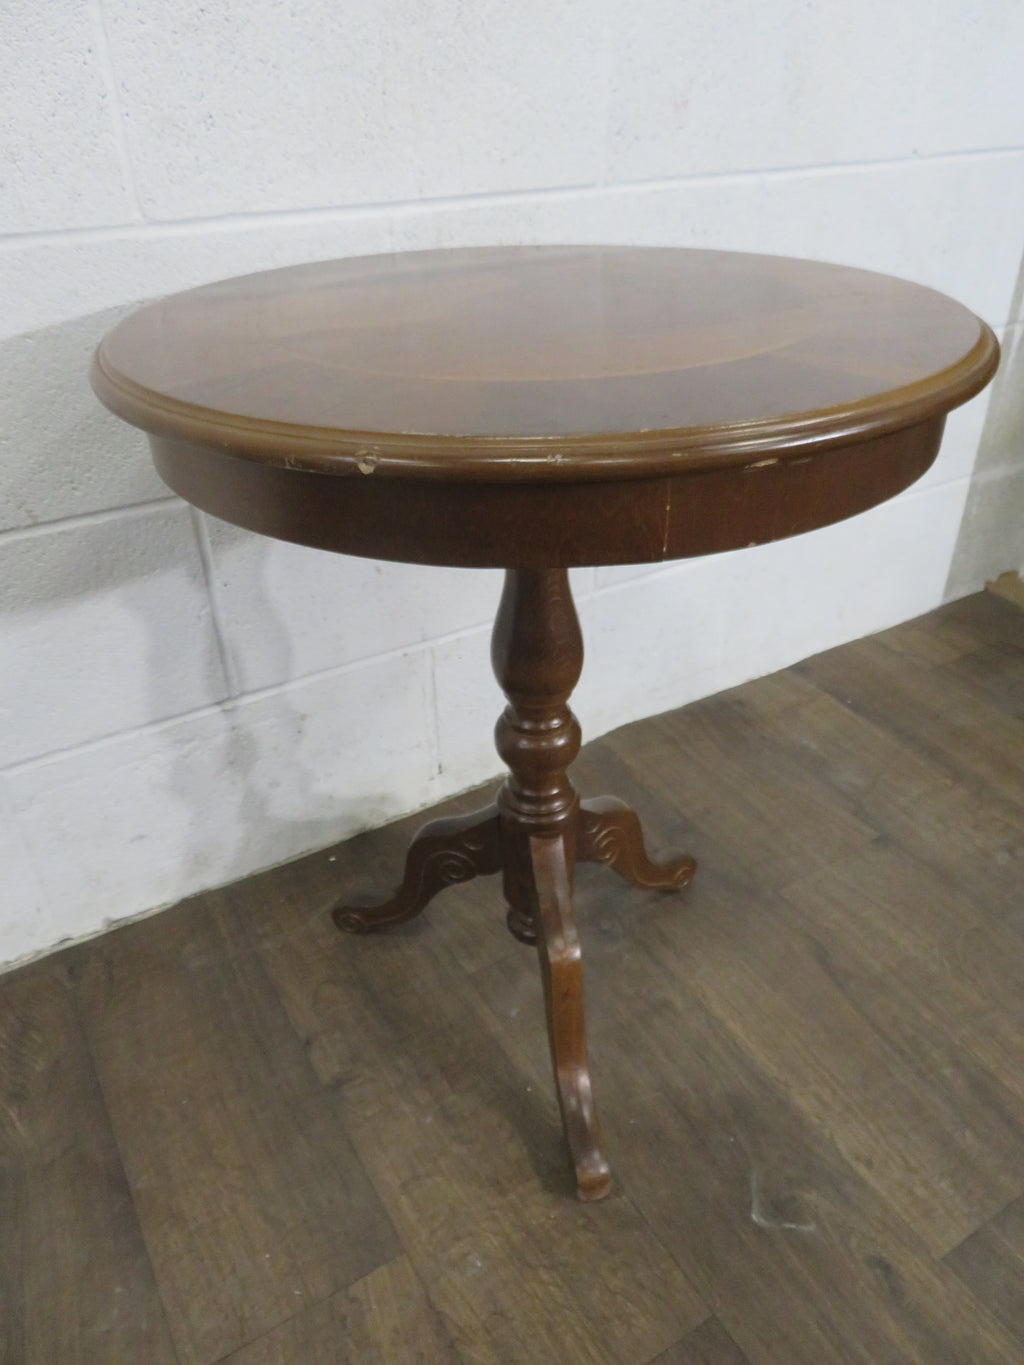 Wooden Side Table with In-Laid Top